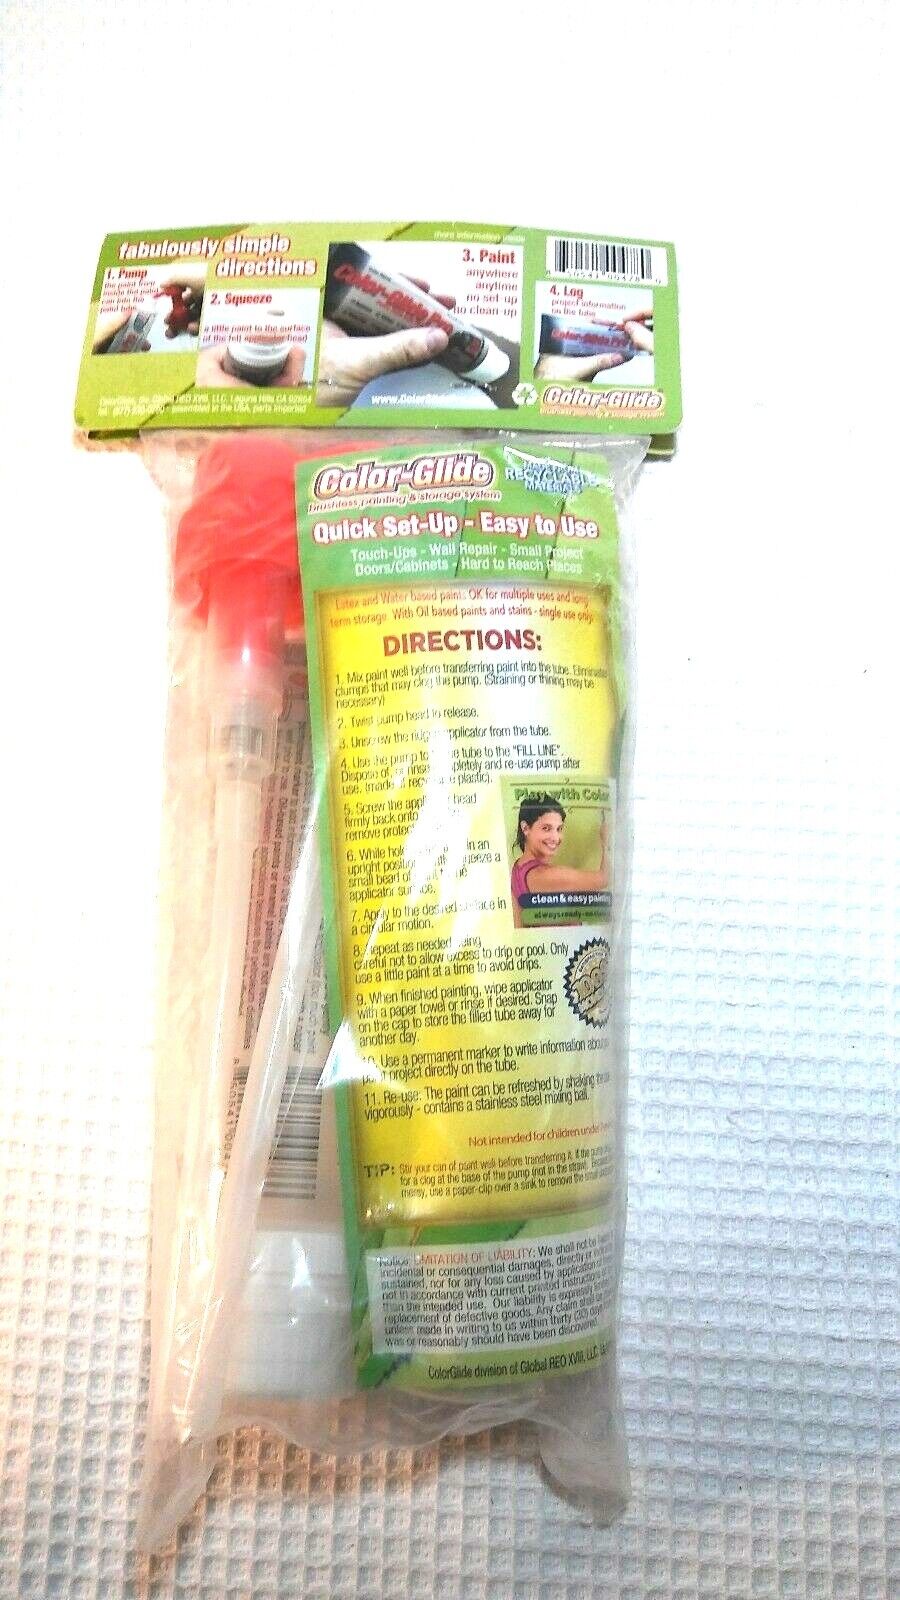 2 Packs! Better Homes Color Glide Brushless Painting And Storage Better Homes & Garden Does Not Apply - фотография #2